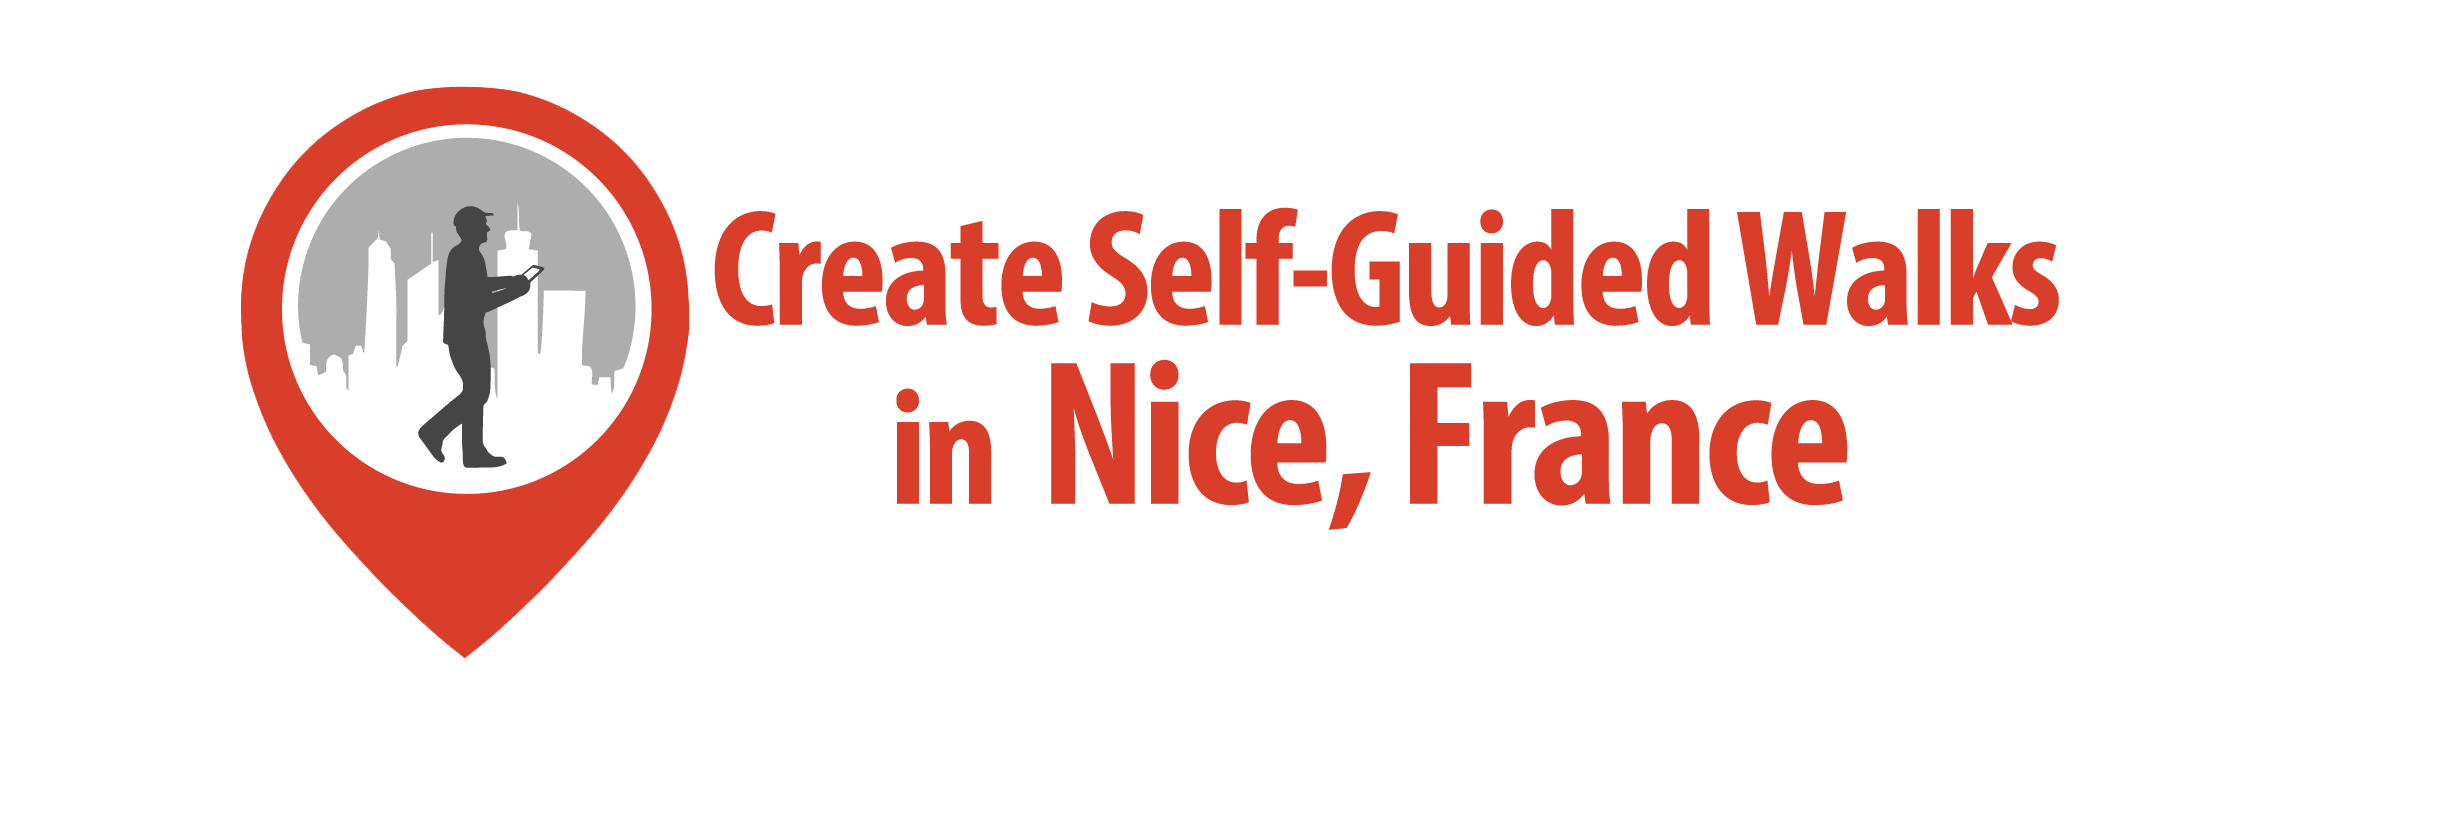 self-guided-nice-logo.png